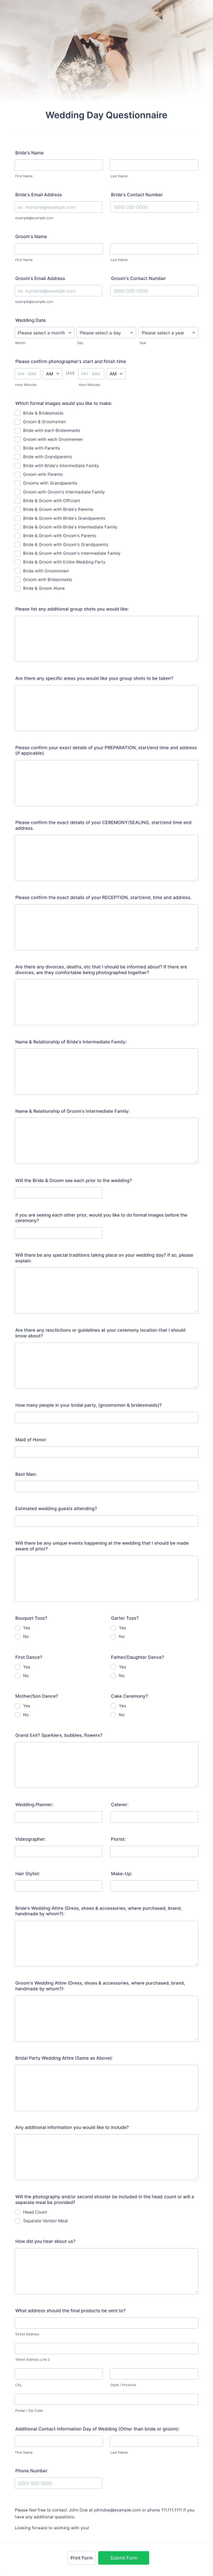 Wedding Day Questionnaire Form Template